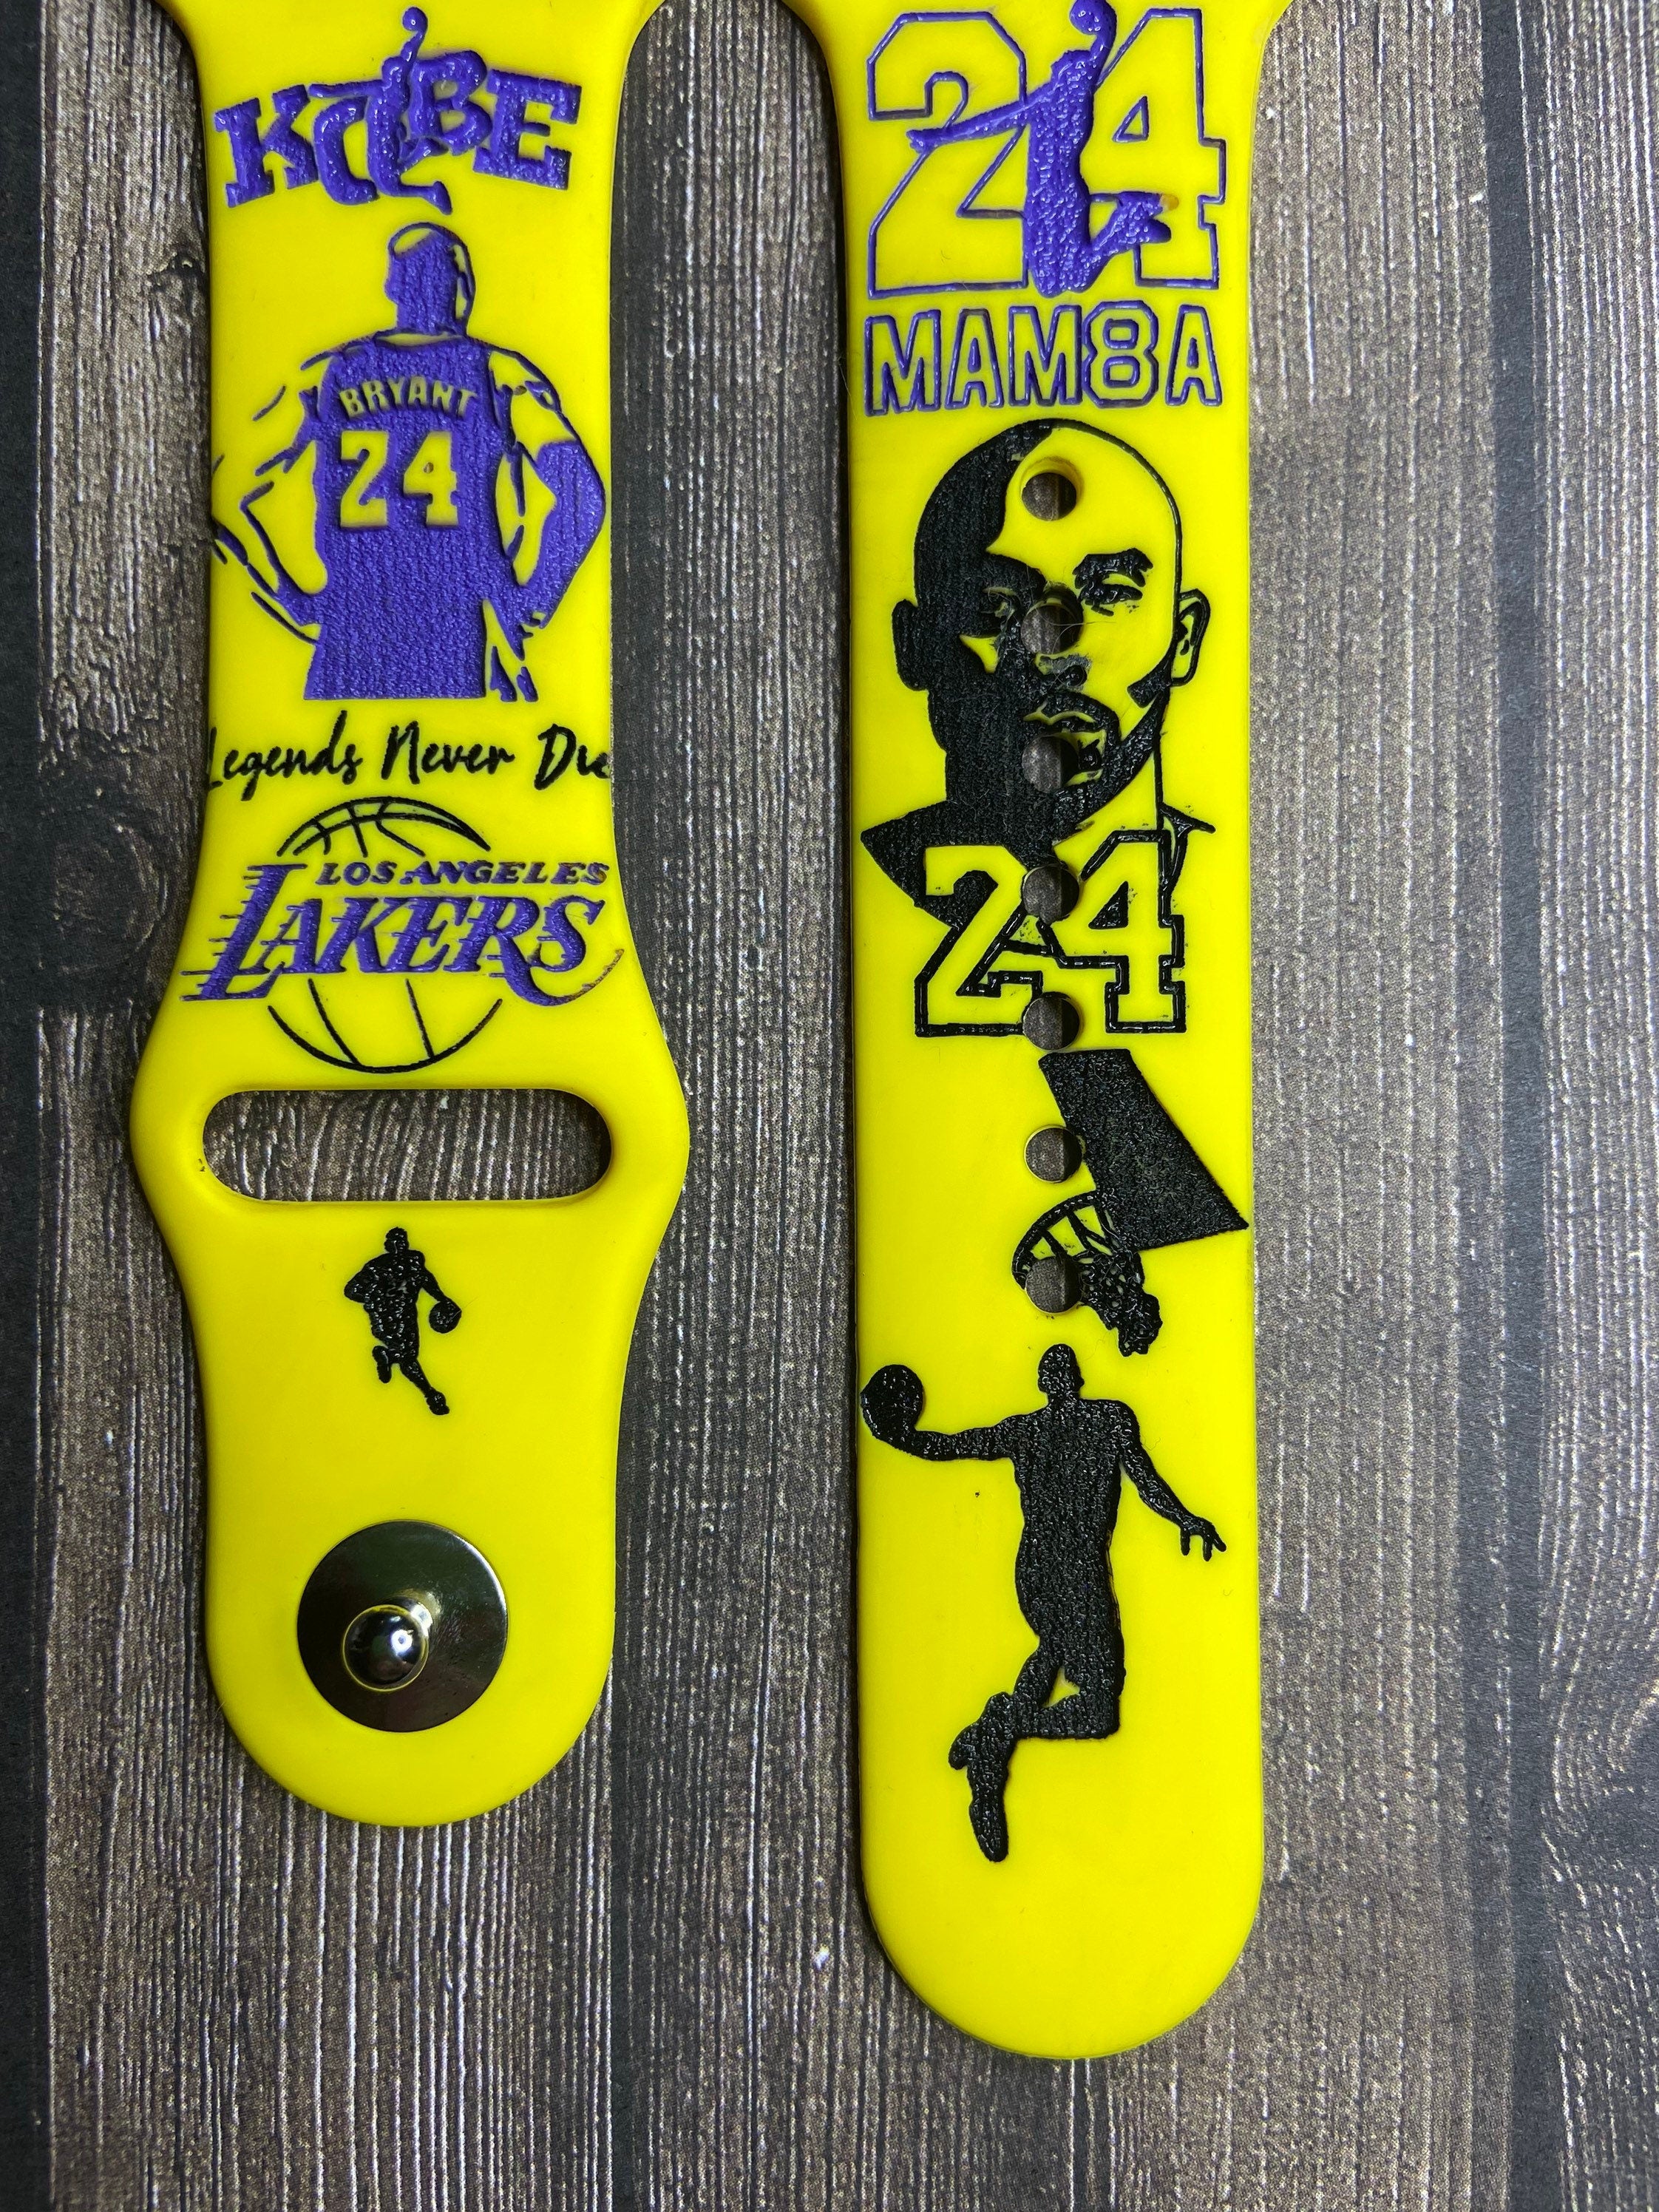 Kobe laser engraved smart band, Samsung, Fitbit versa 2 watch band, lakers, kobe, mamba, fathers day gift, gift for him